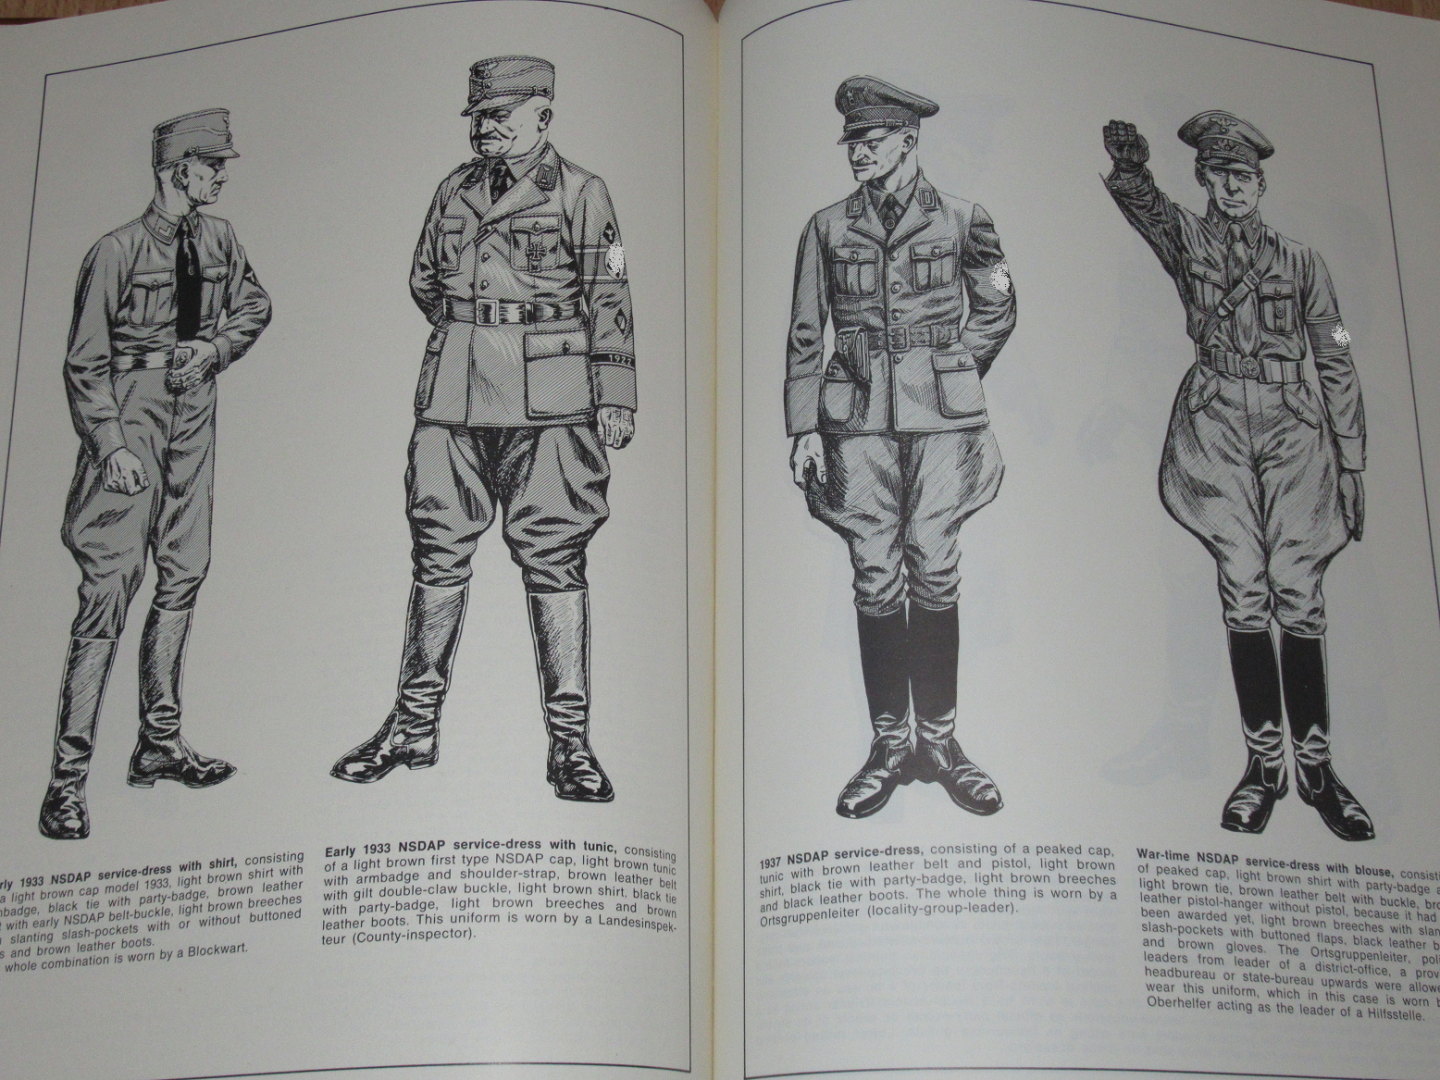 Kahl, Rudolf - Uniforms and Badges of the Third Reich - volume 1 : NSDAP